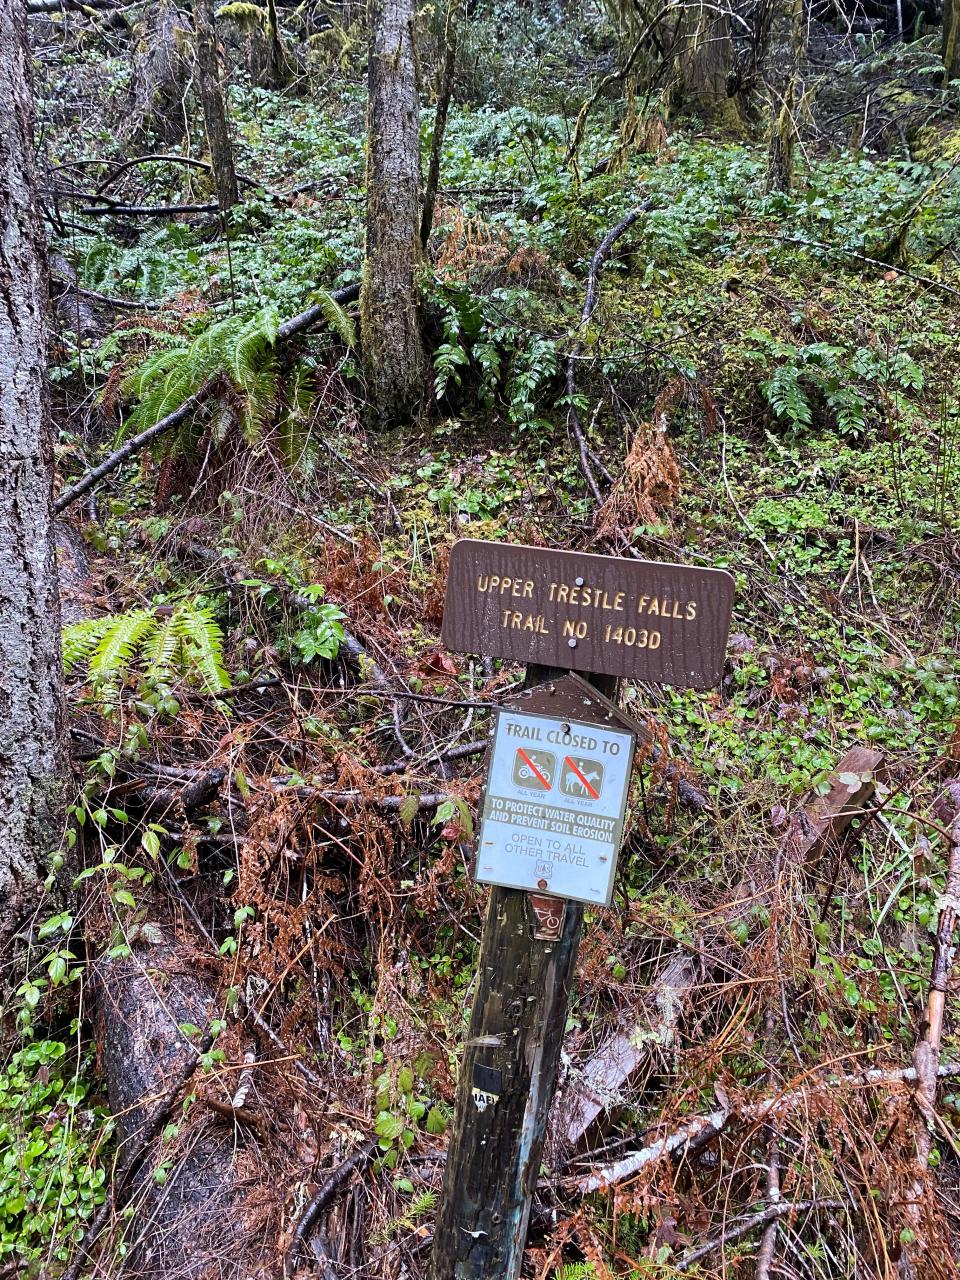 The sign for the Upper Trestle Creek Falls Trail along NF-22